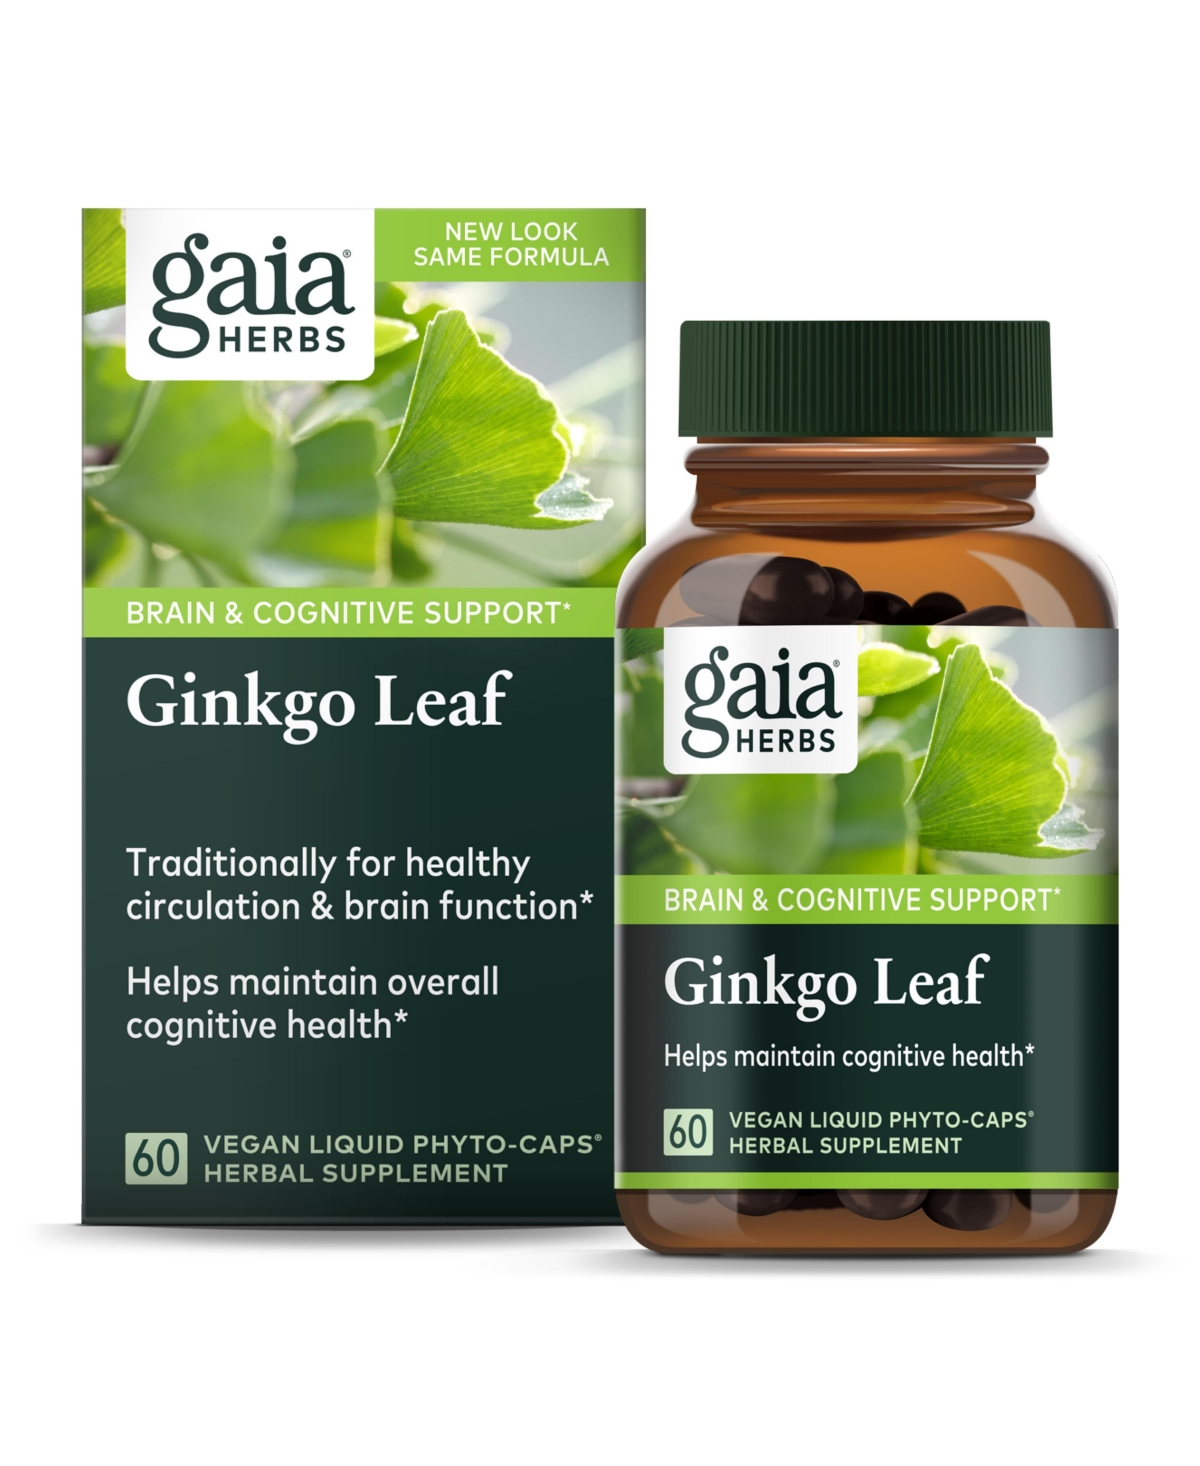 Ginkgo Leaf - Traditionally Used to Support Healthy Circulation and Brain Function - Organic, Herbal Supplement - 60 Liquid Phyto-Capsules